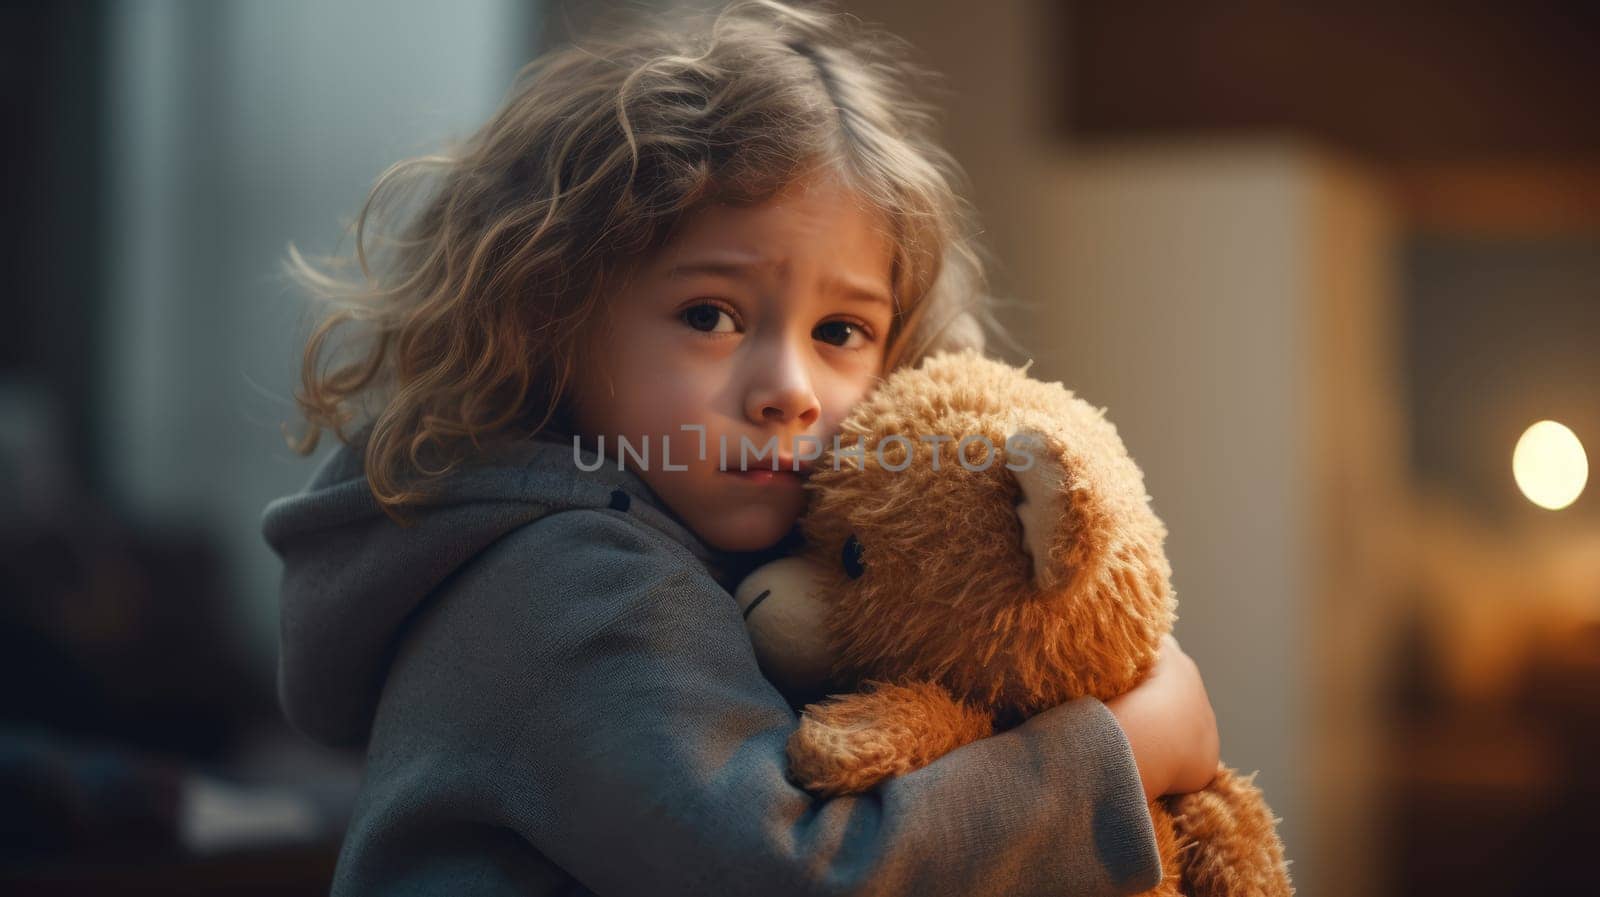 Little lonely girl hugging teddy bear, suffering loneliness, family problems. Sad child hugs a plush toy bear